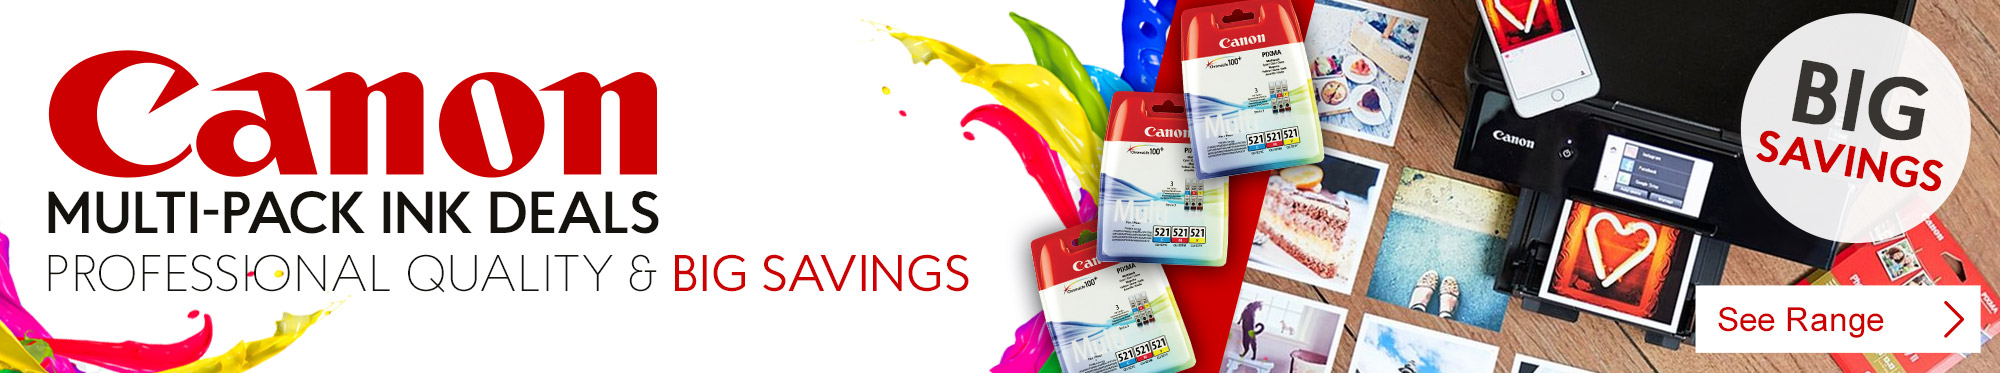 Great Deals on Canon Ink Multipacks